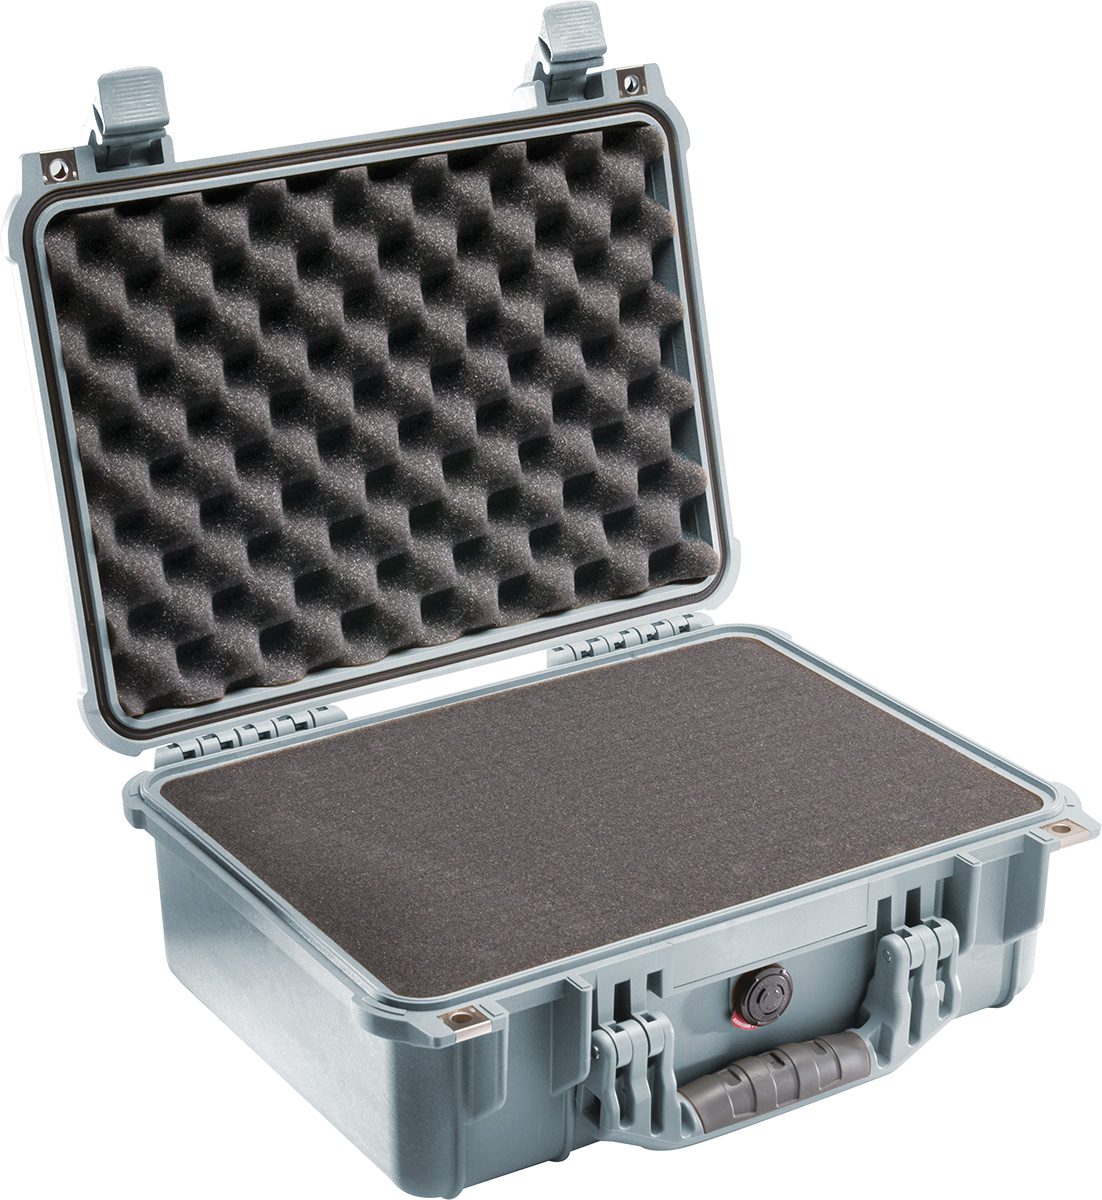 Pelican Products 1450 Protector Case - Silver, Foam